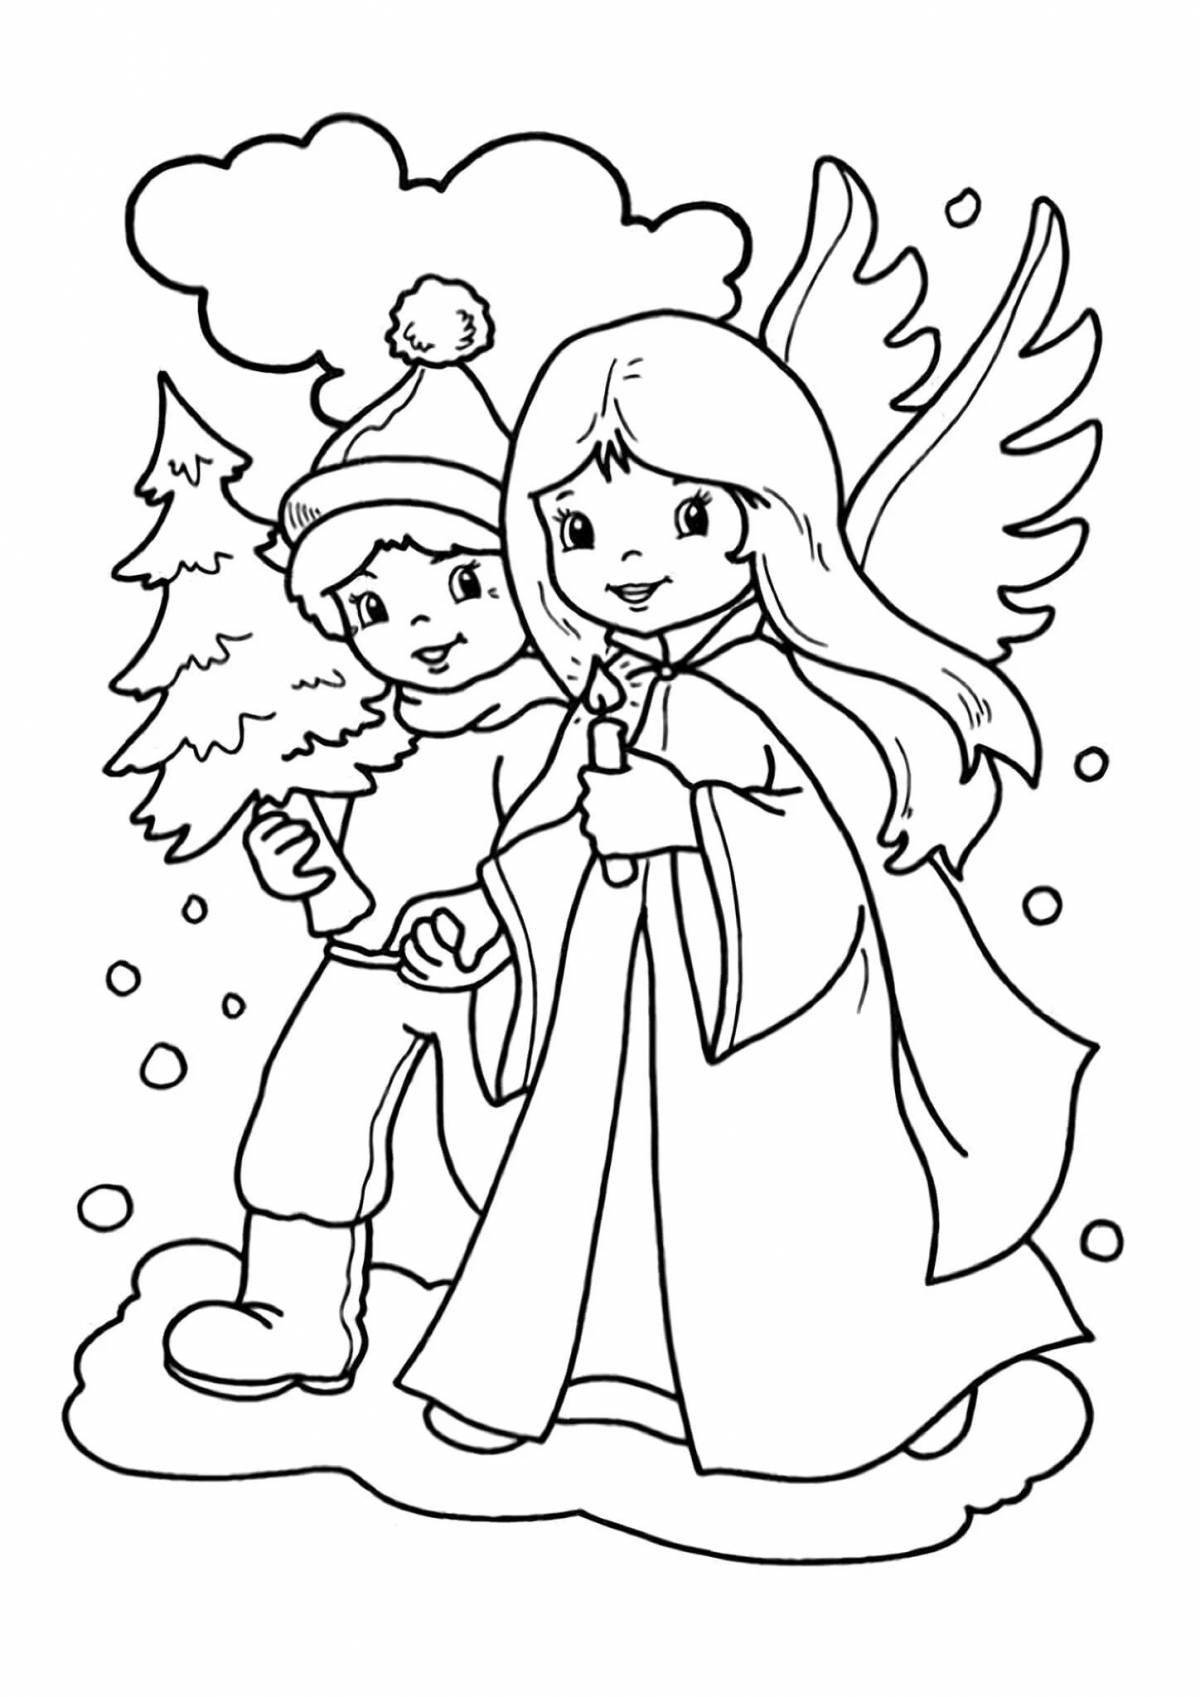 Exquisite angel Christmas coloring book